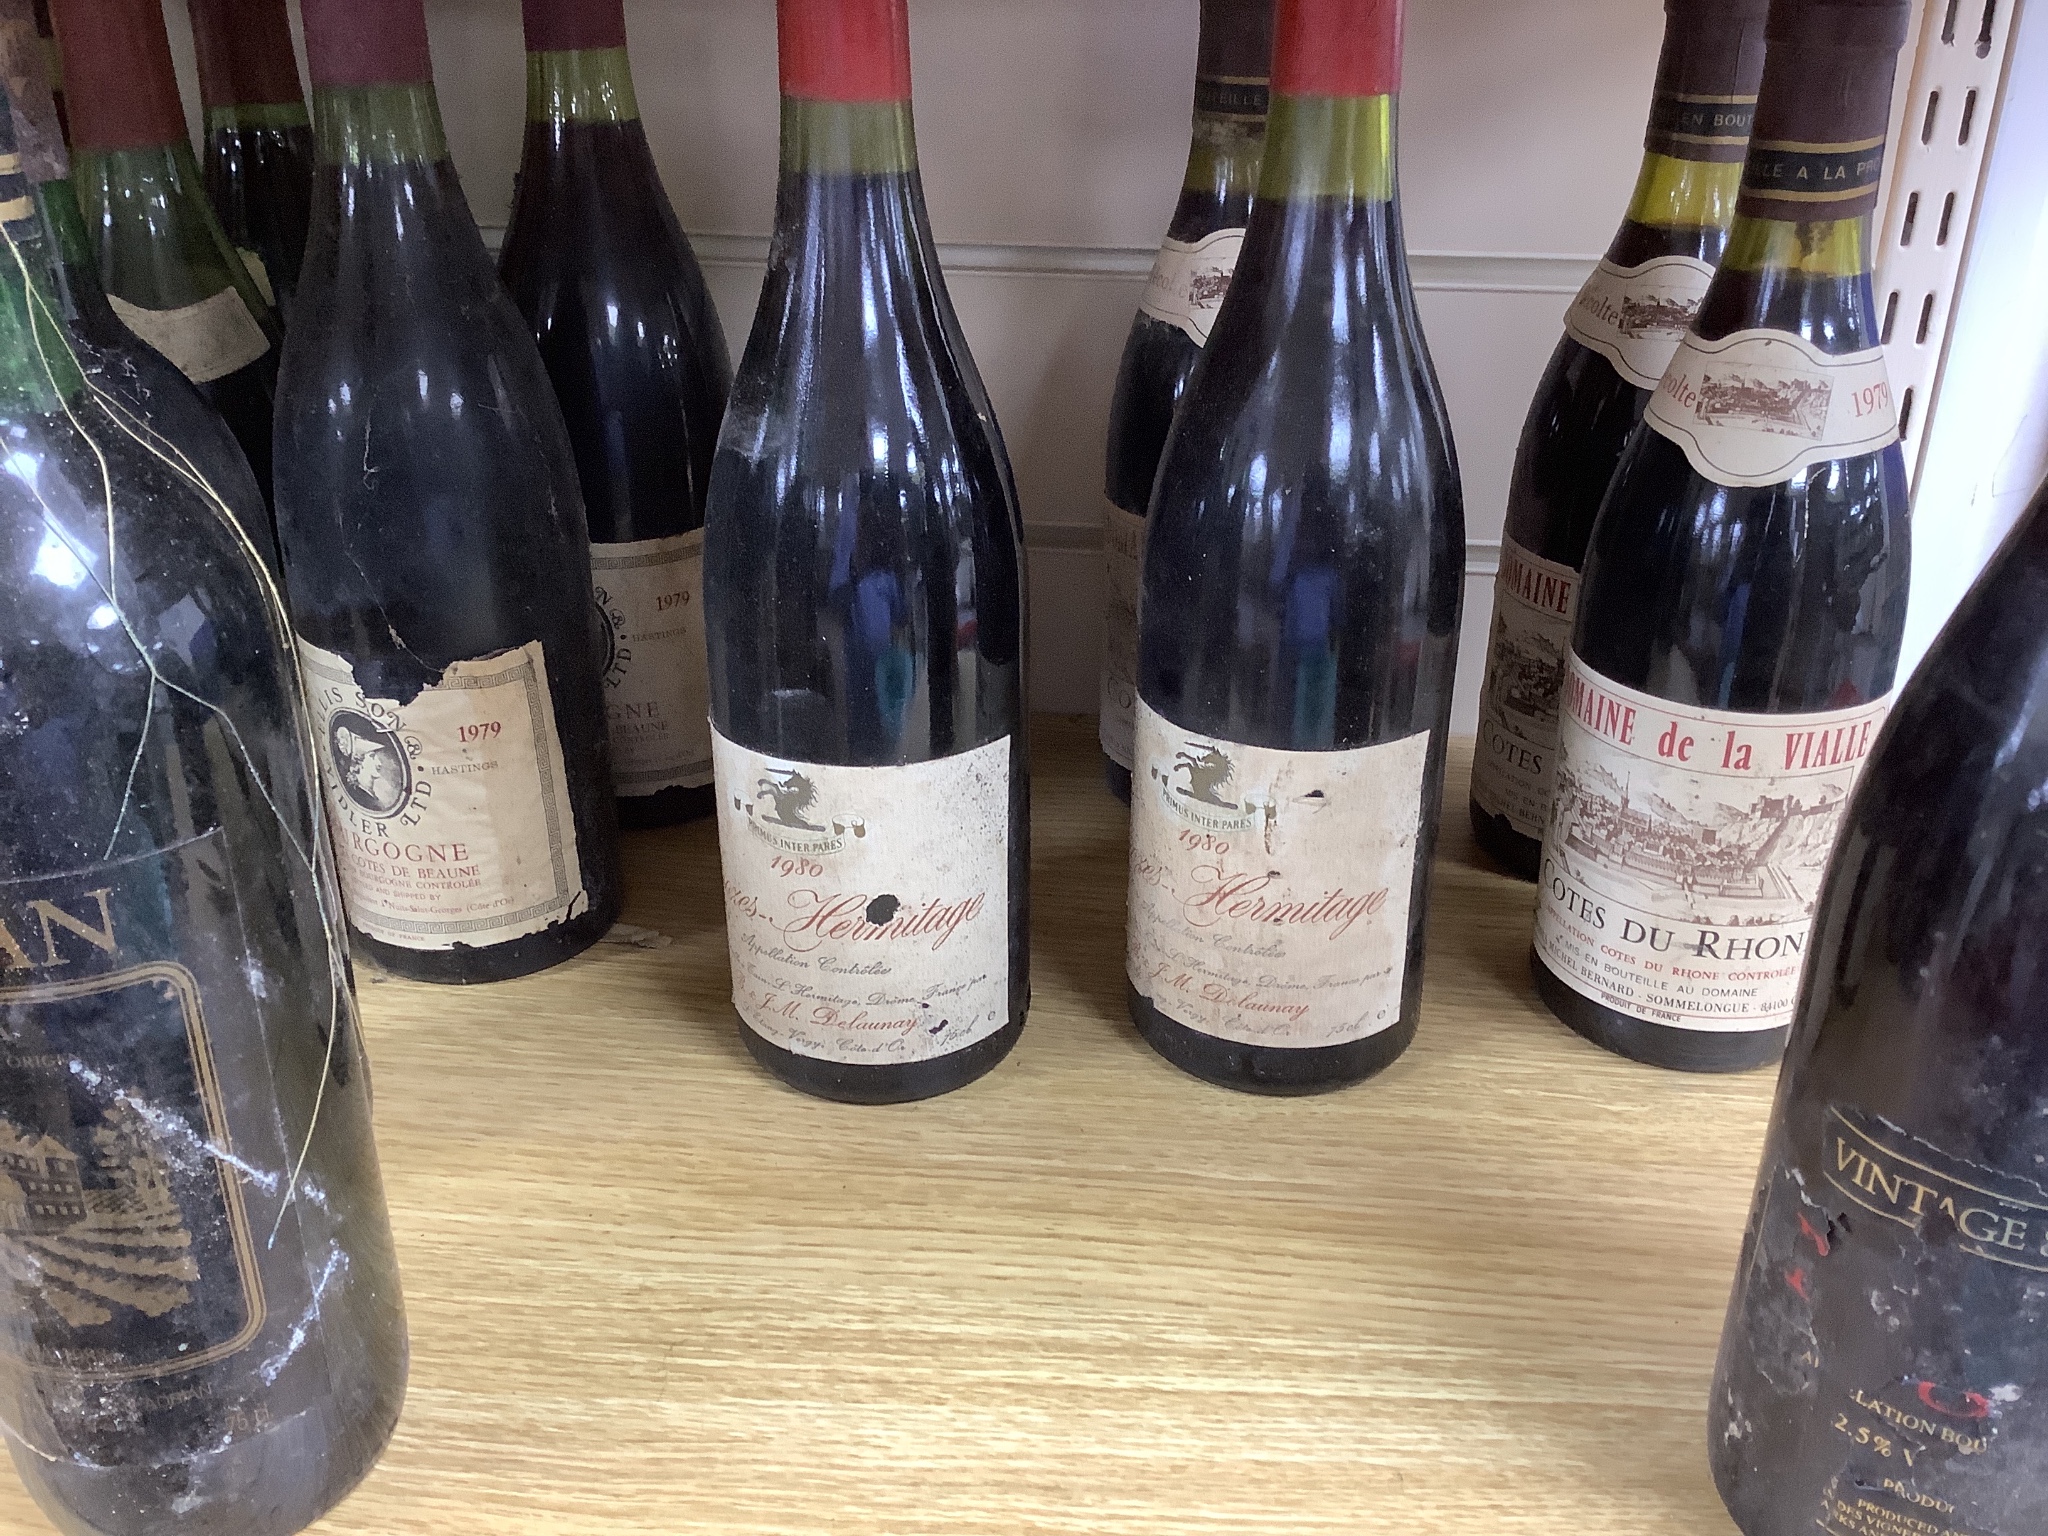 23 bottles of red wine including two bottles of Crozes Hermitage 1980